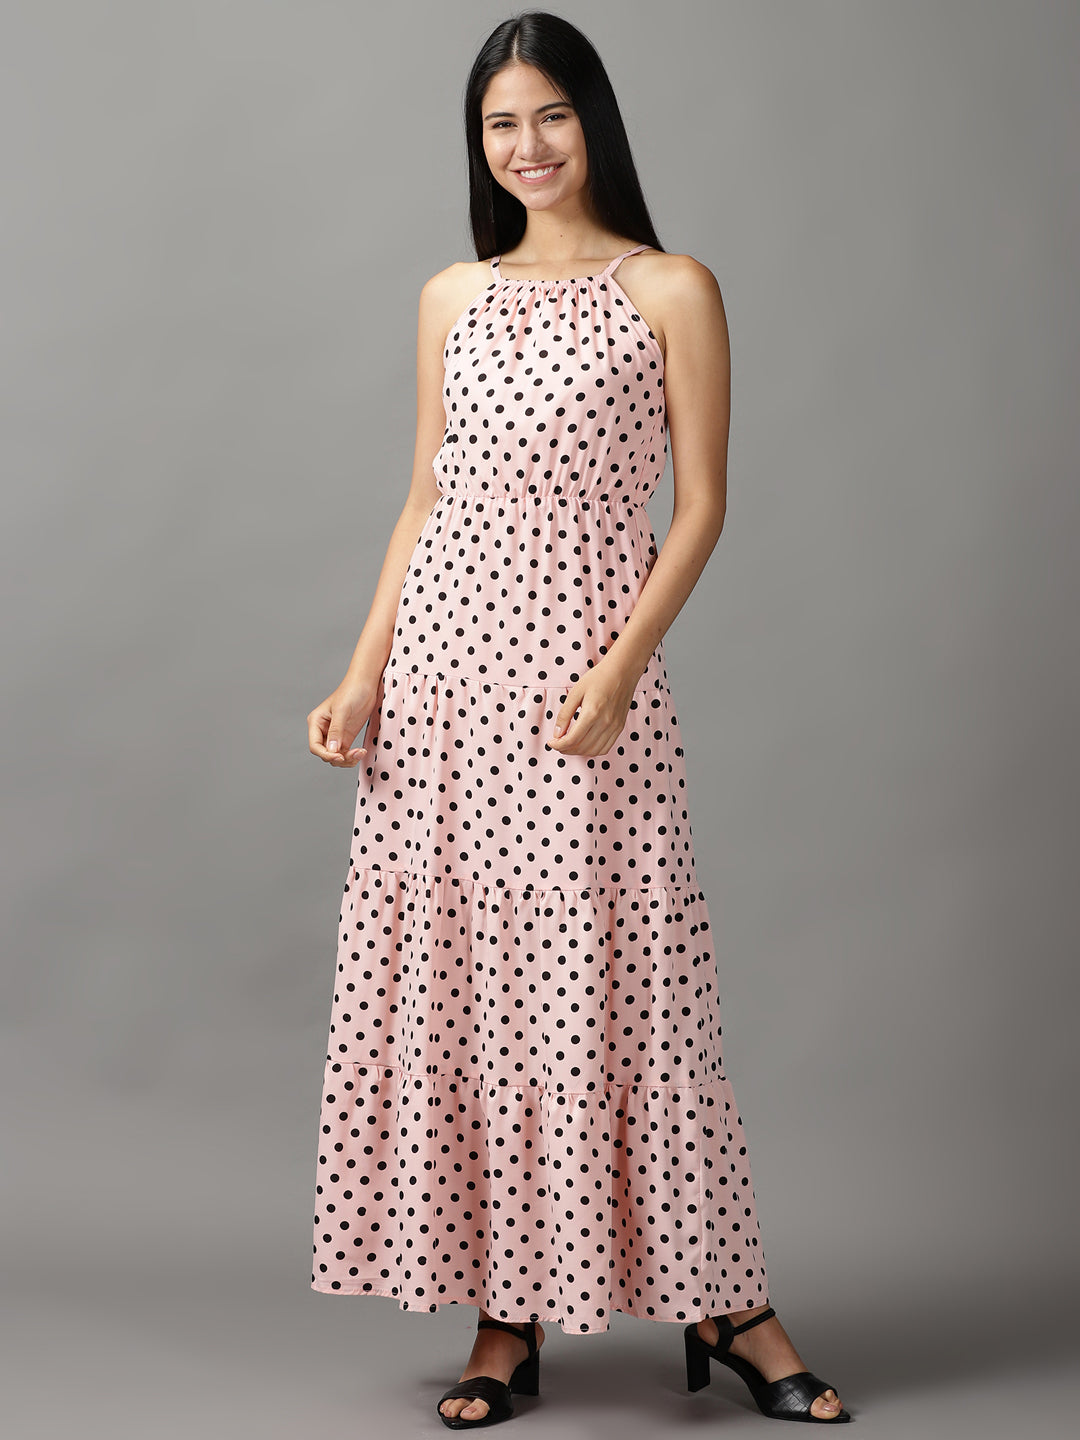 Women's Pink Polka Dots Fit and Flare Dress